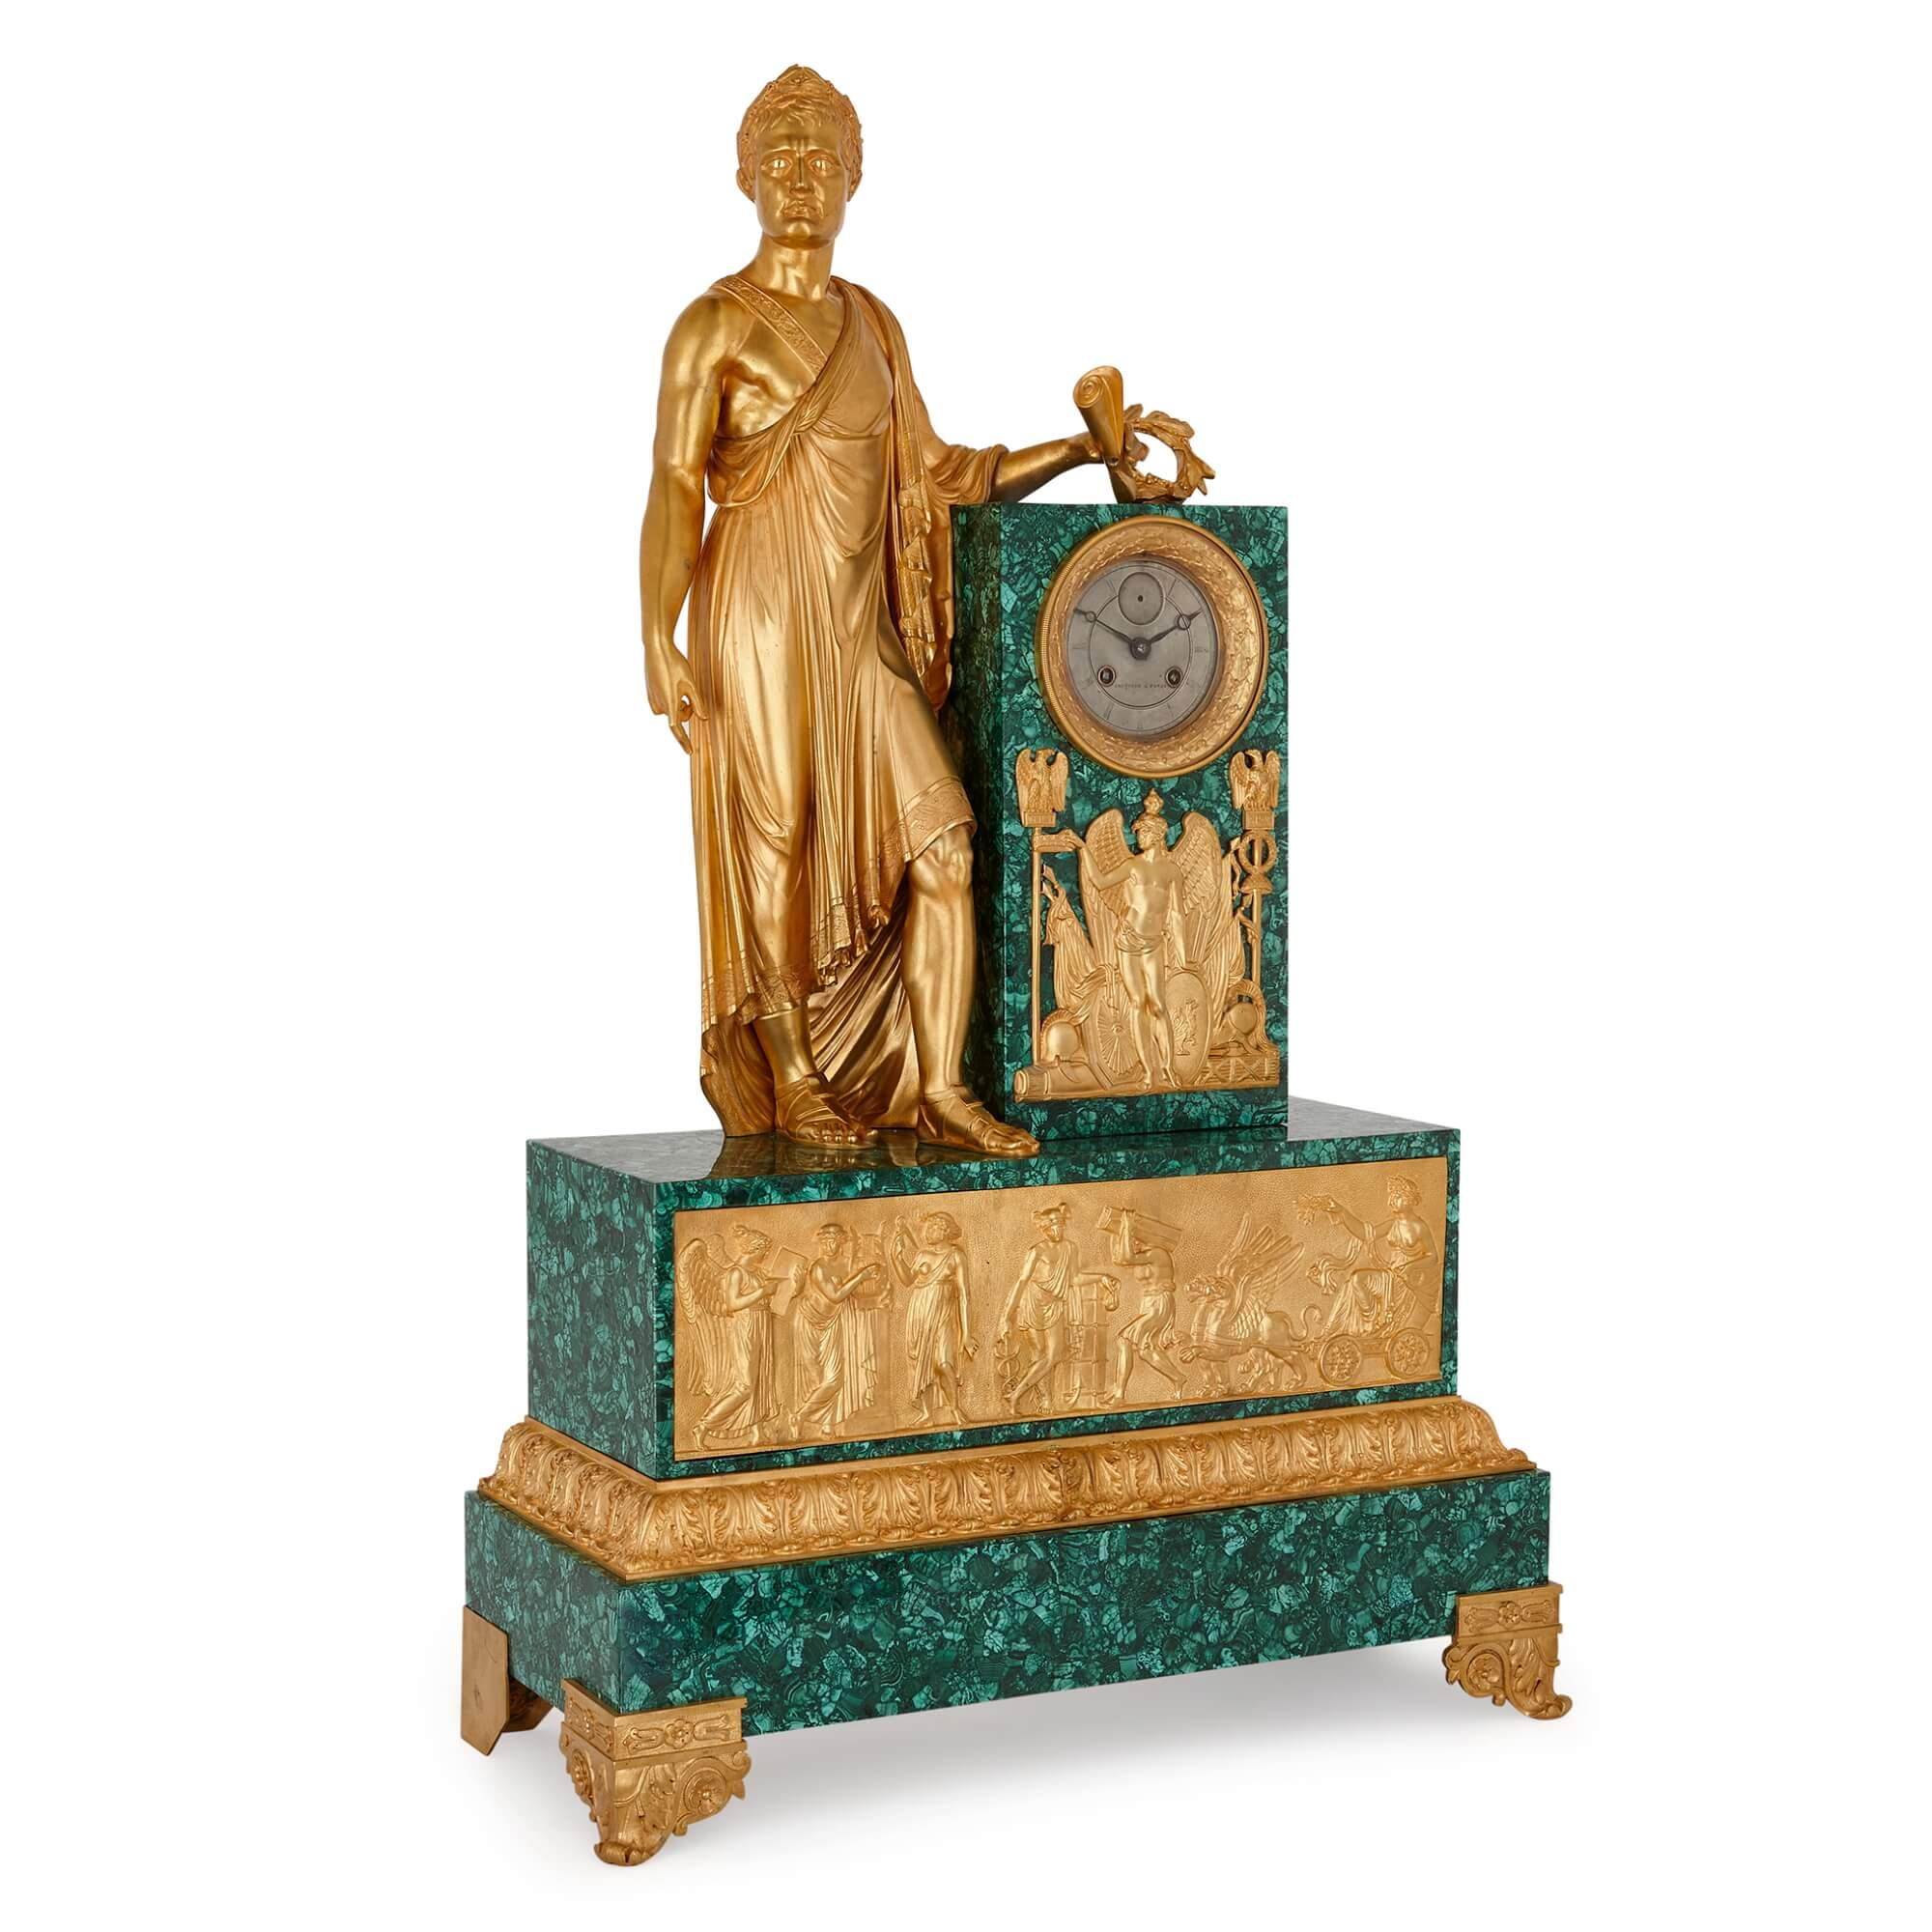 Large and very Fine French Empire period ormolu and malachite mantel clock
French, circa 1825
Height 89cm, width 57cm, depth 23cm
This very Fine, sculpturally decorated mantel clock dates to the first French Empire period, and combines excellent